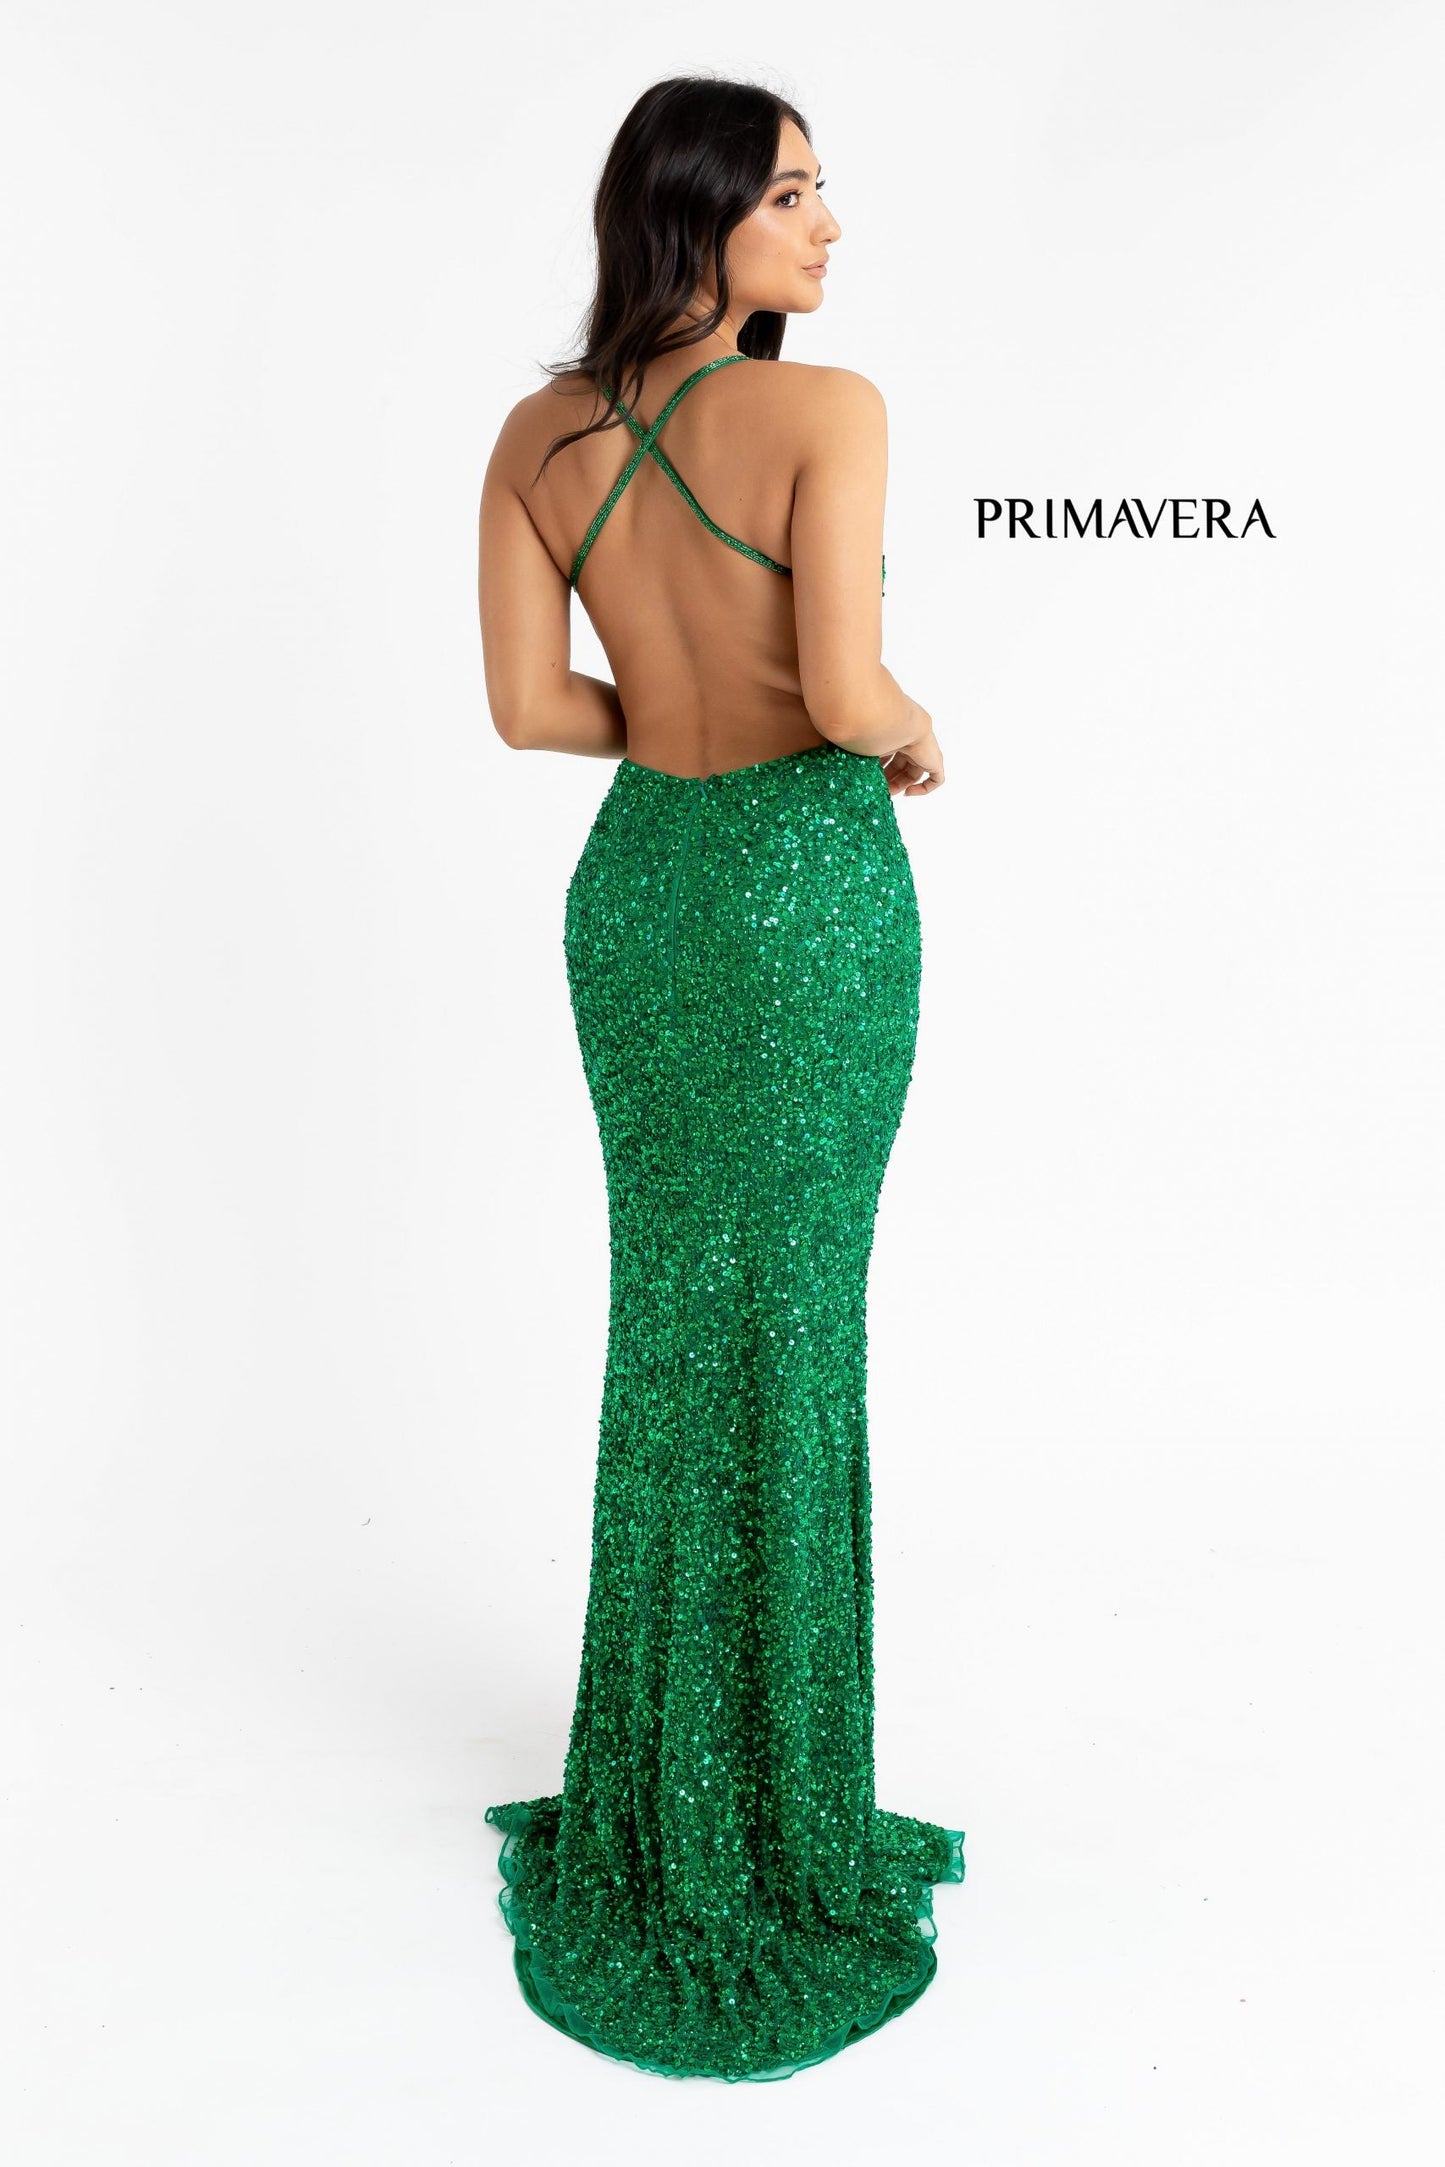 Primavera Couture 3291 Size 2 Purple Long Fitted Backless Sequin Prom Dress Formal Gown Slit